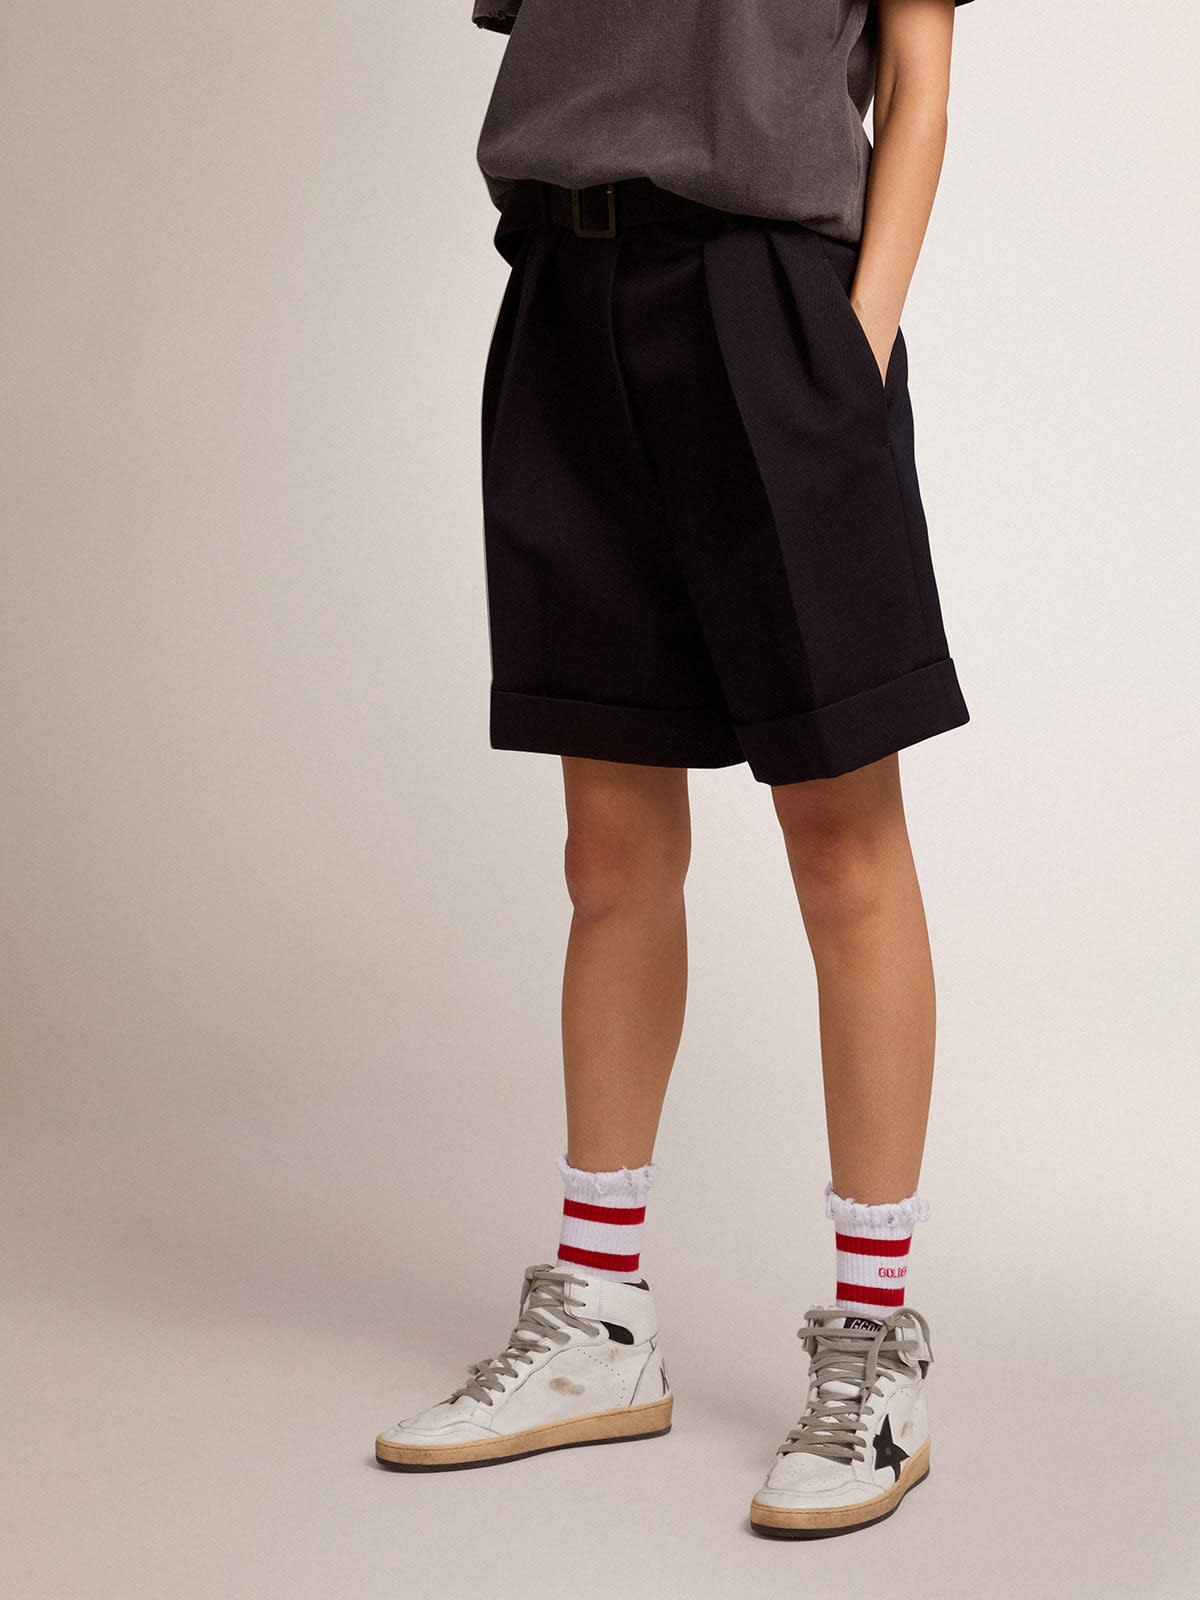 Golden Collection shorts in black wool gabardine with belt at the waist - 2